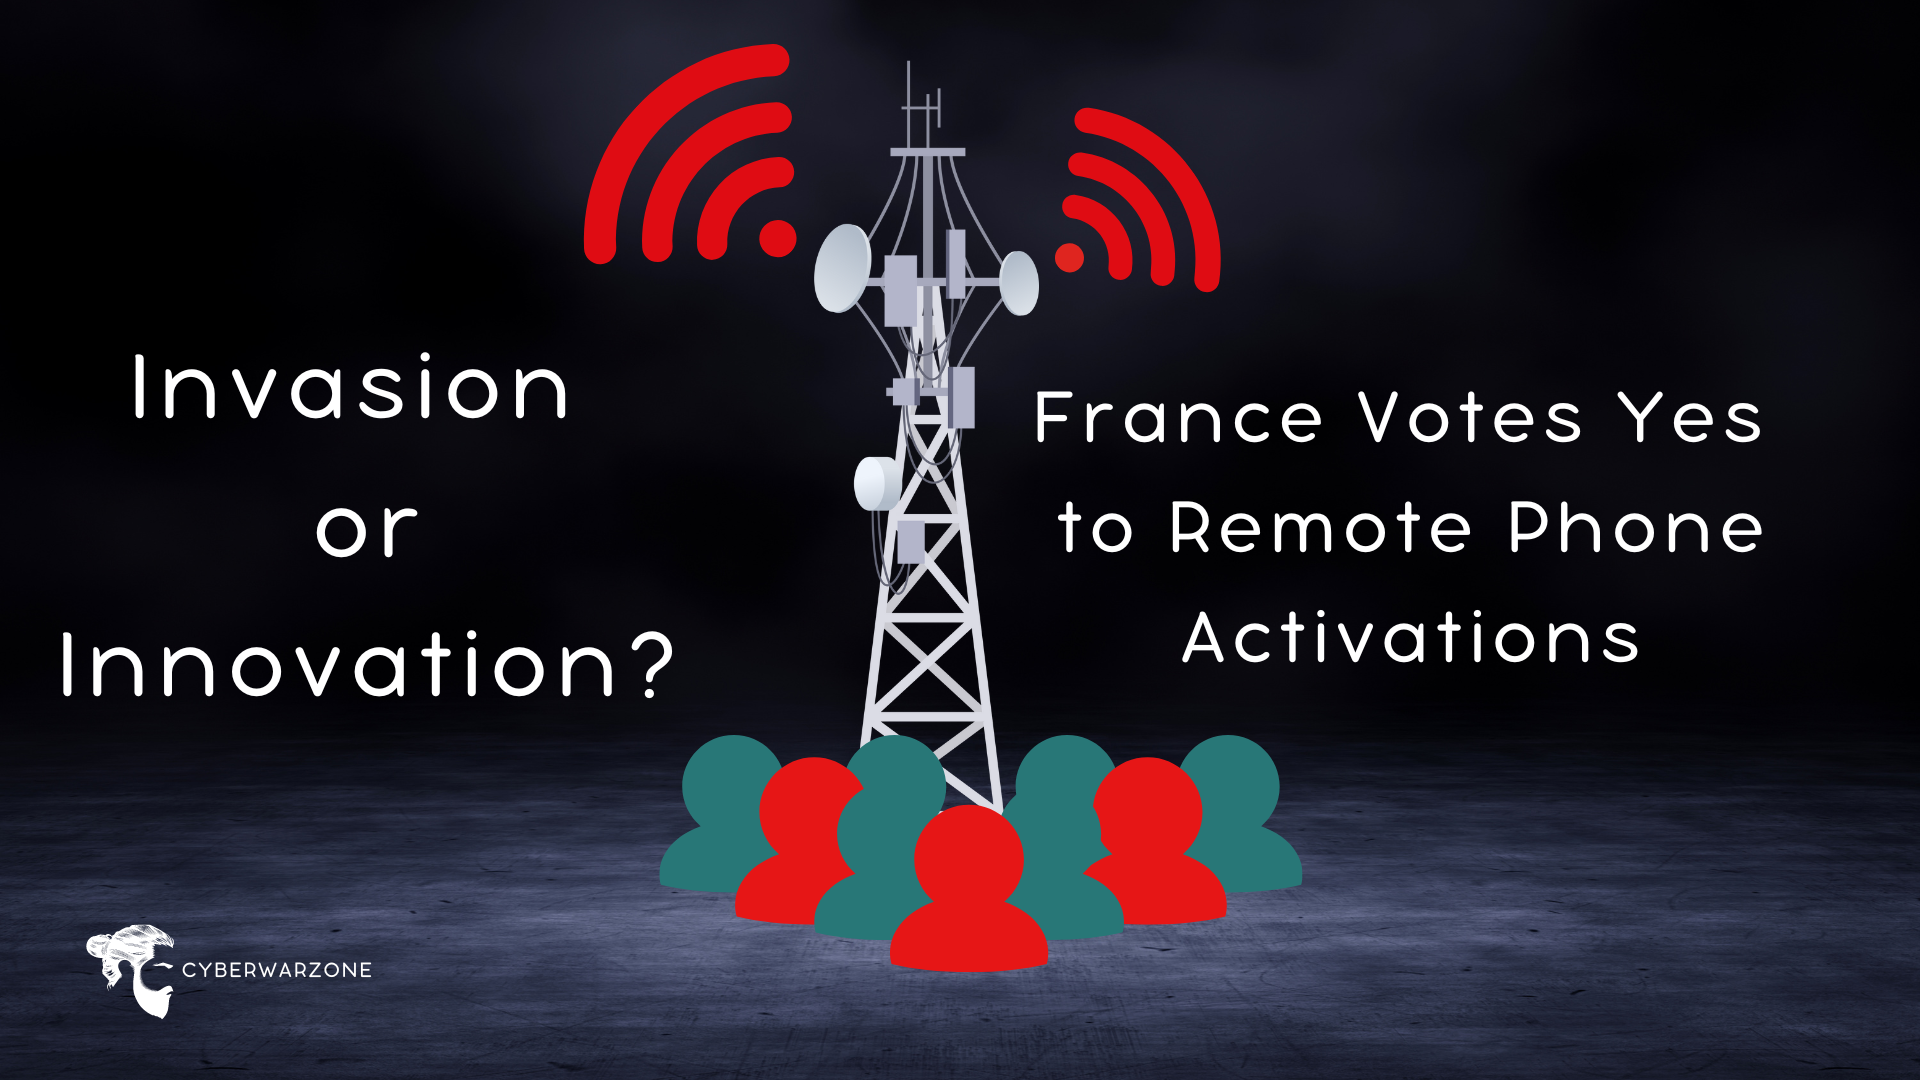 Invasion or Innovation? France Votes Yes to Remote Phone Activations